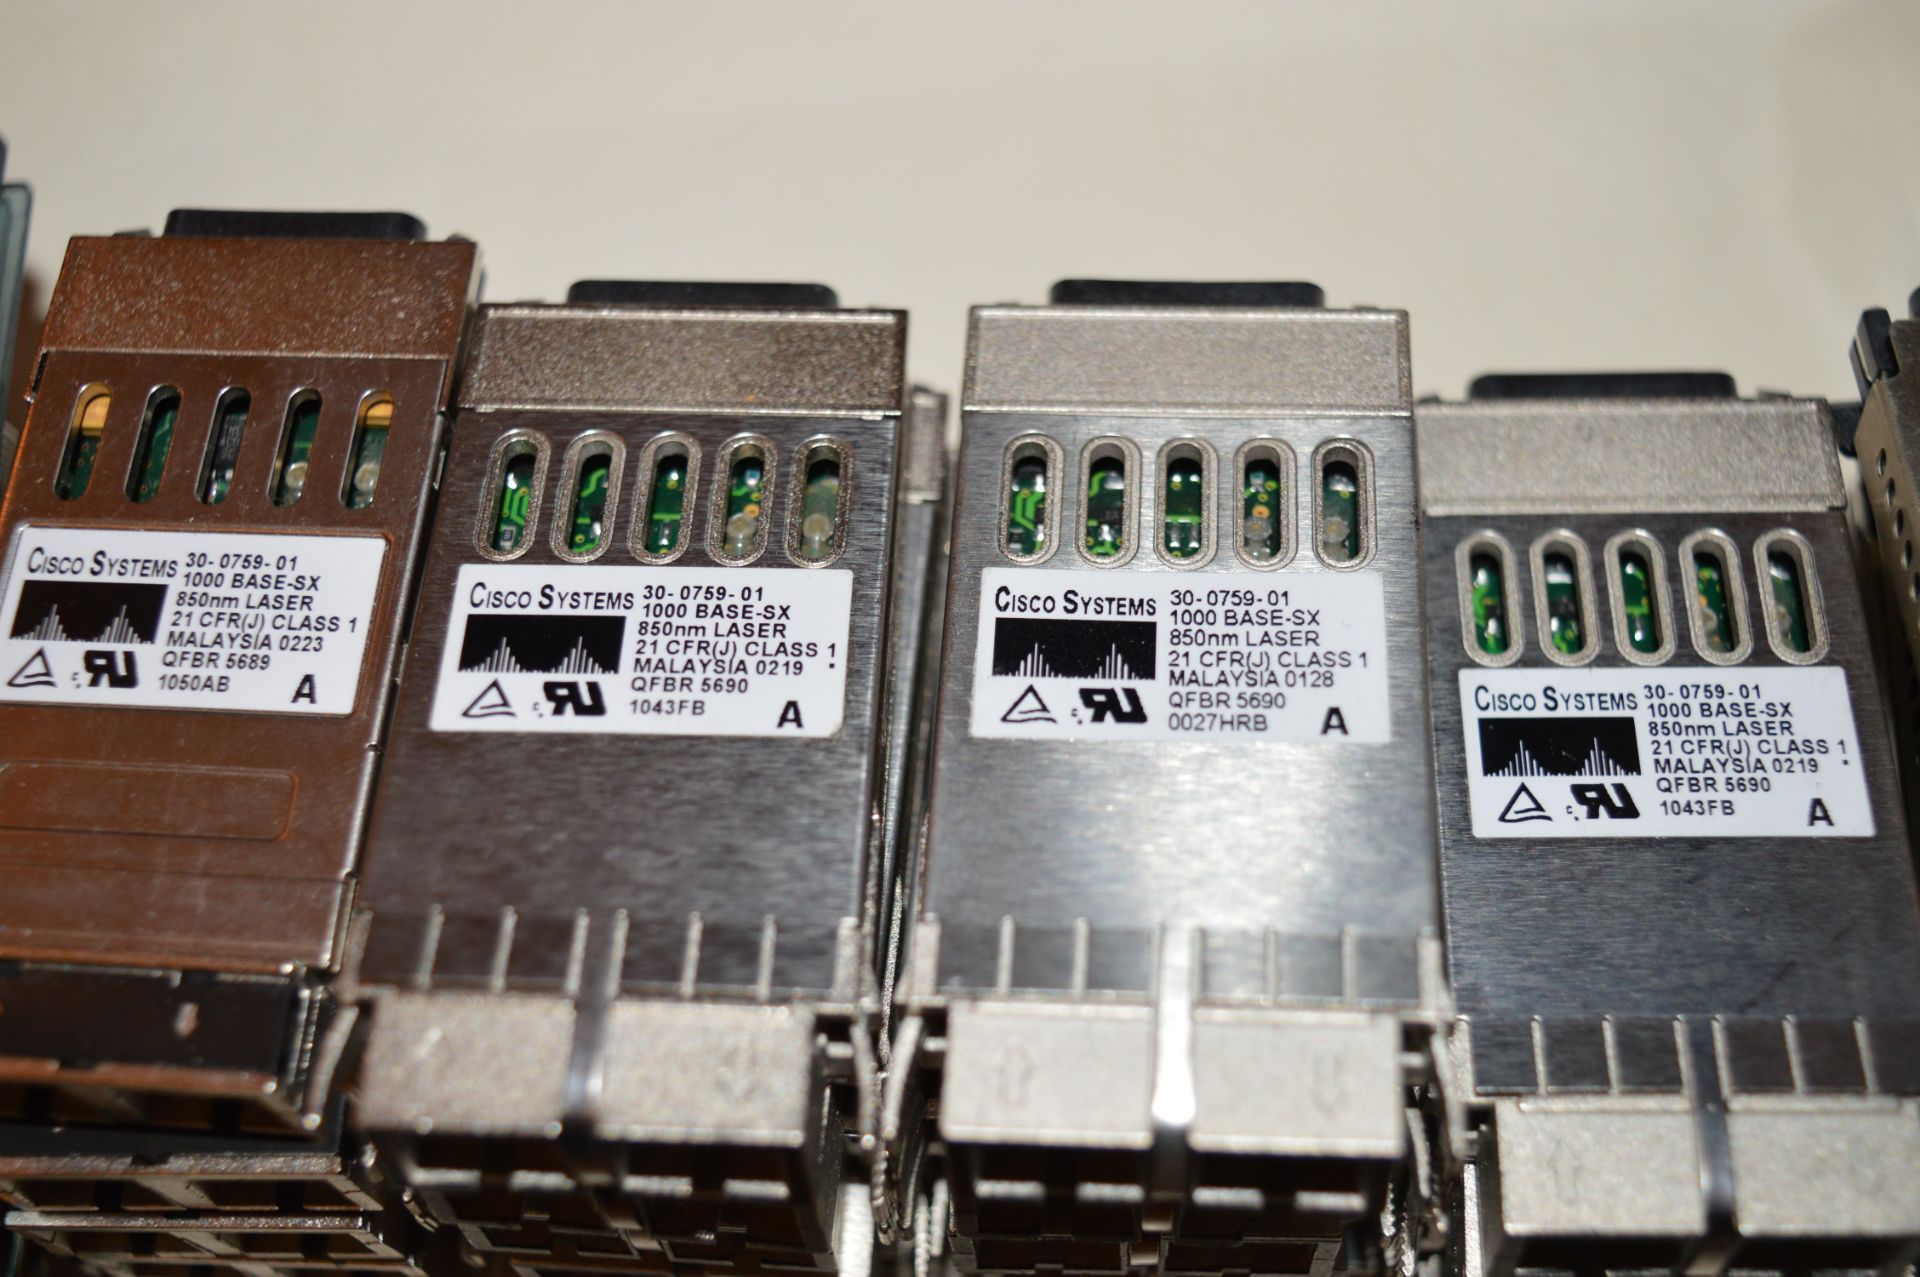 28 x Cisco Systems GBIC Transceivers - Mainly Type 30-0759-01 - Some Others Also Included - - Image 3 of 4